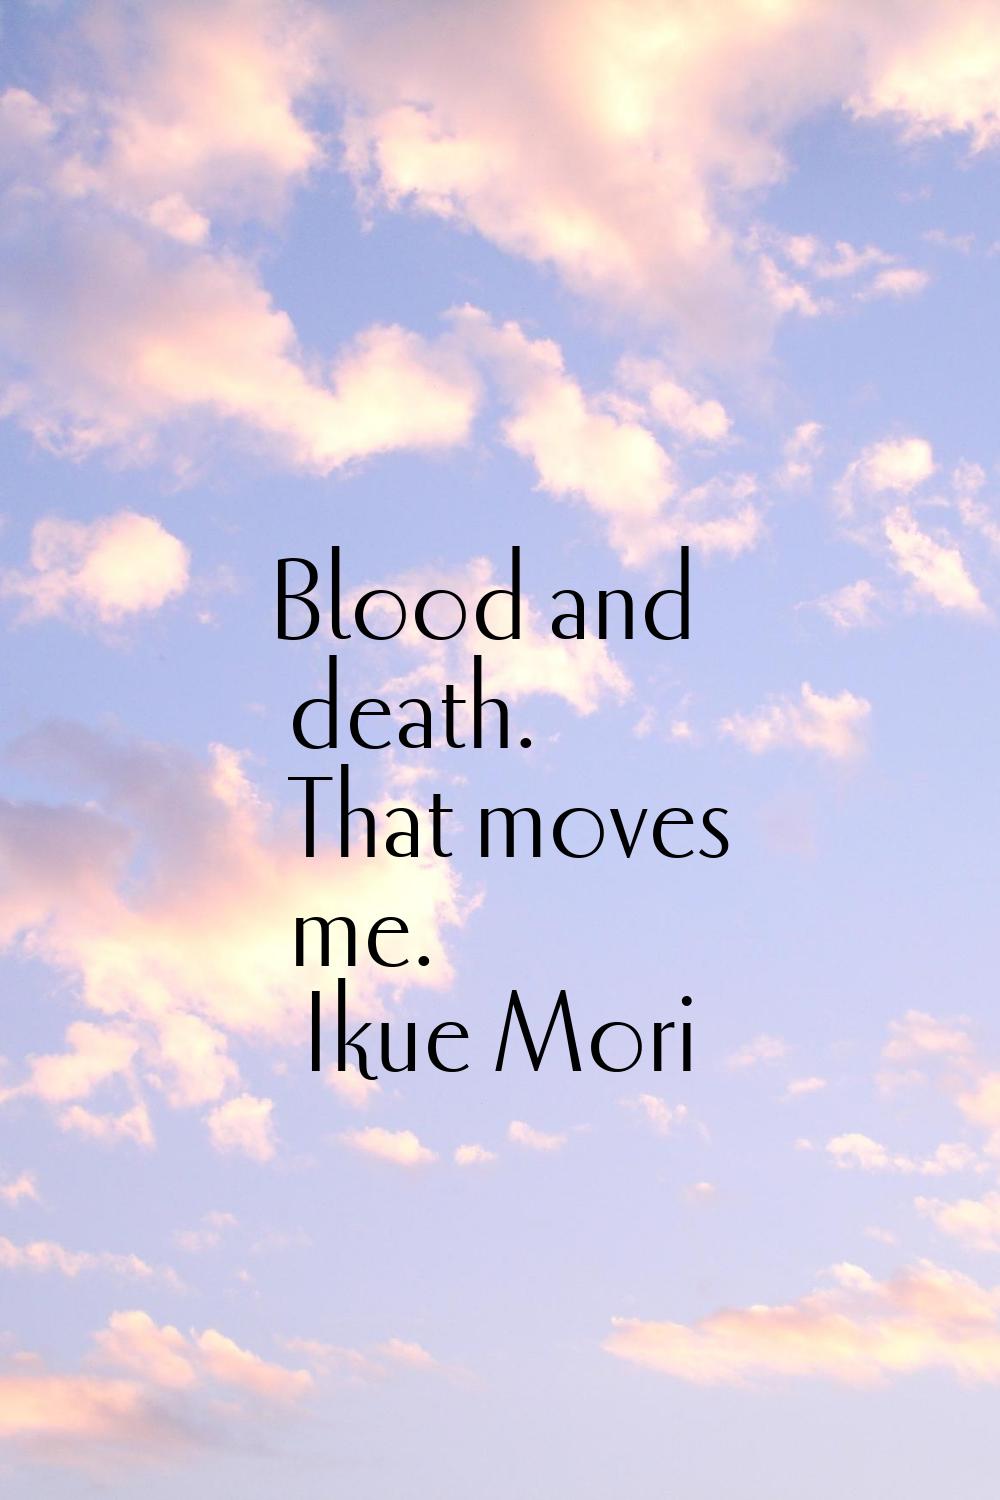 Blood and death. That moves me.